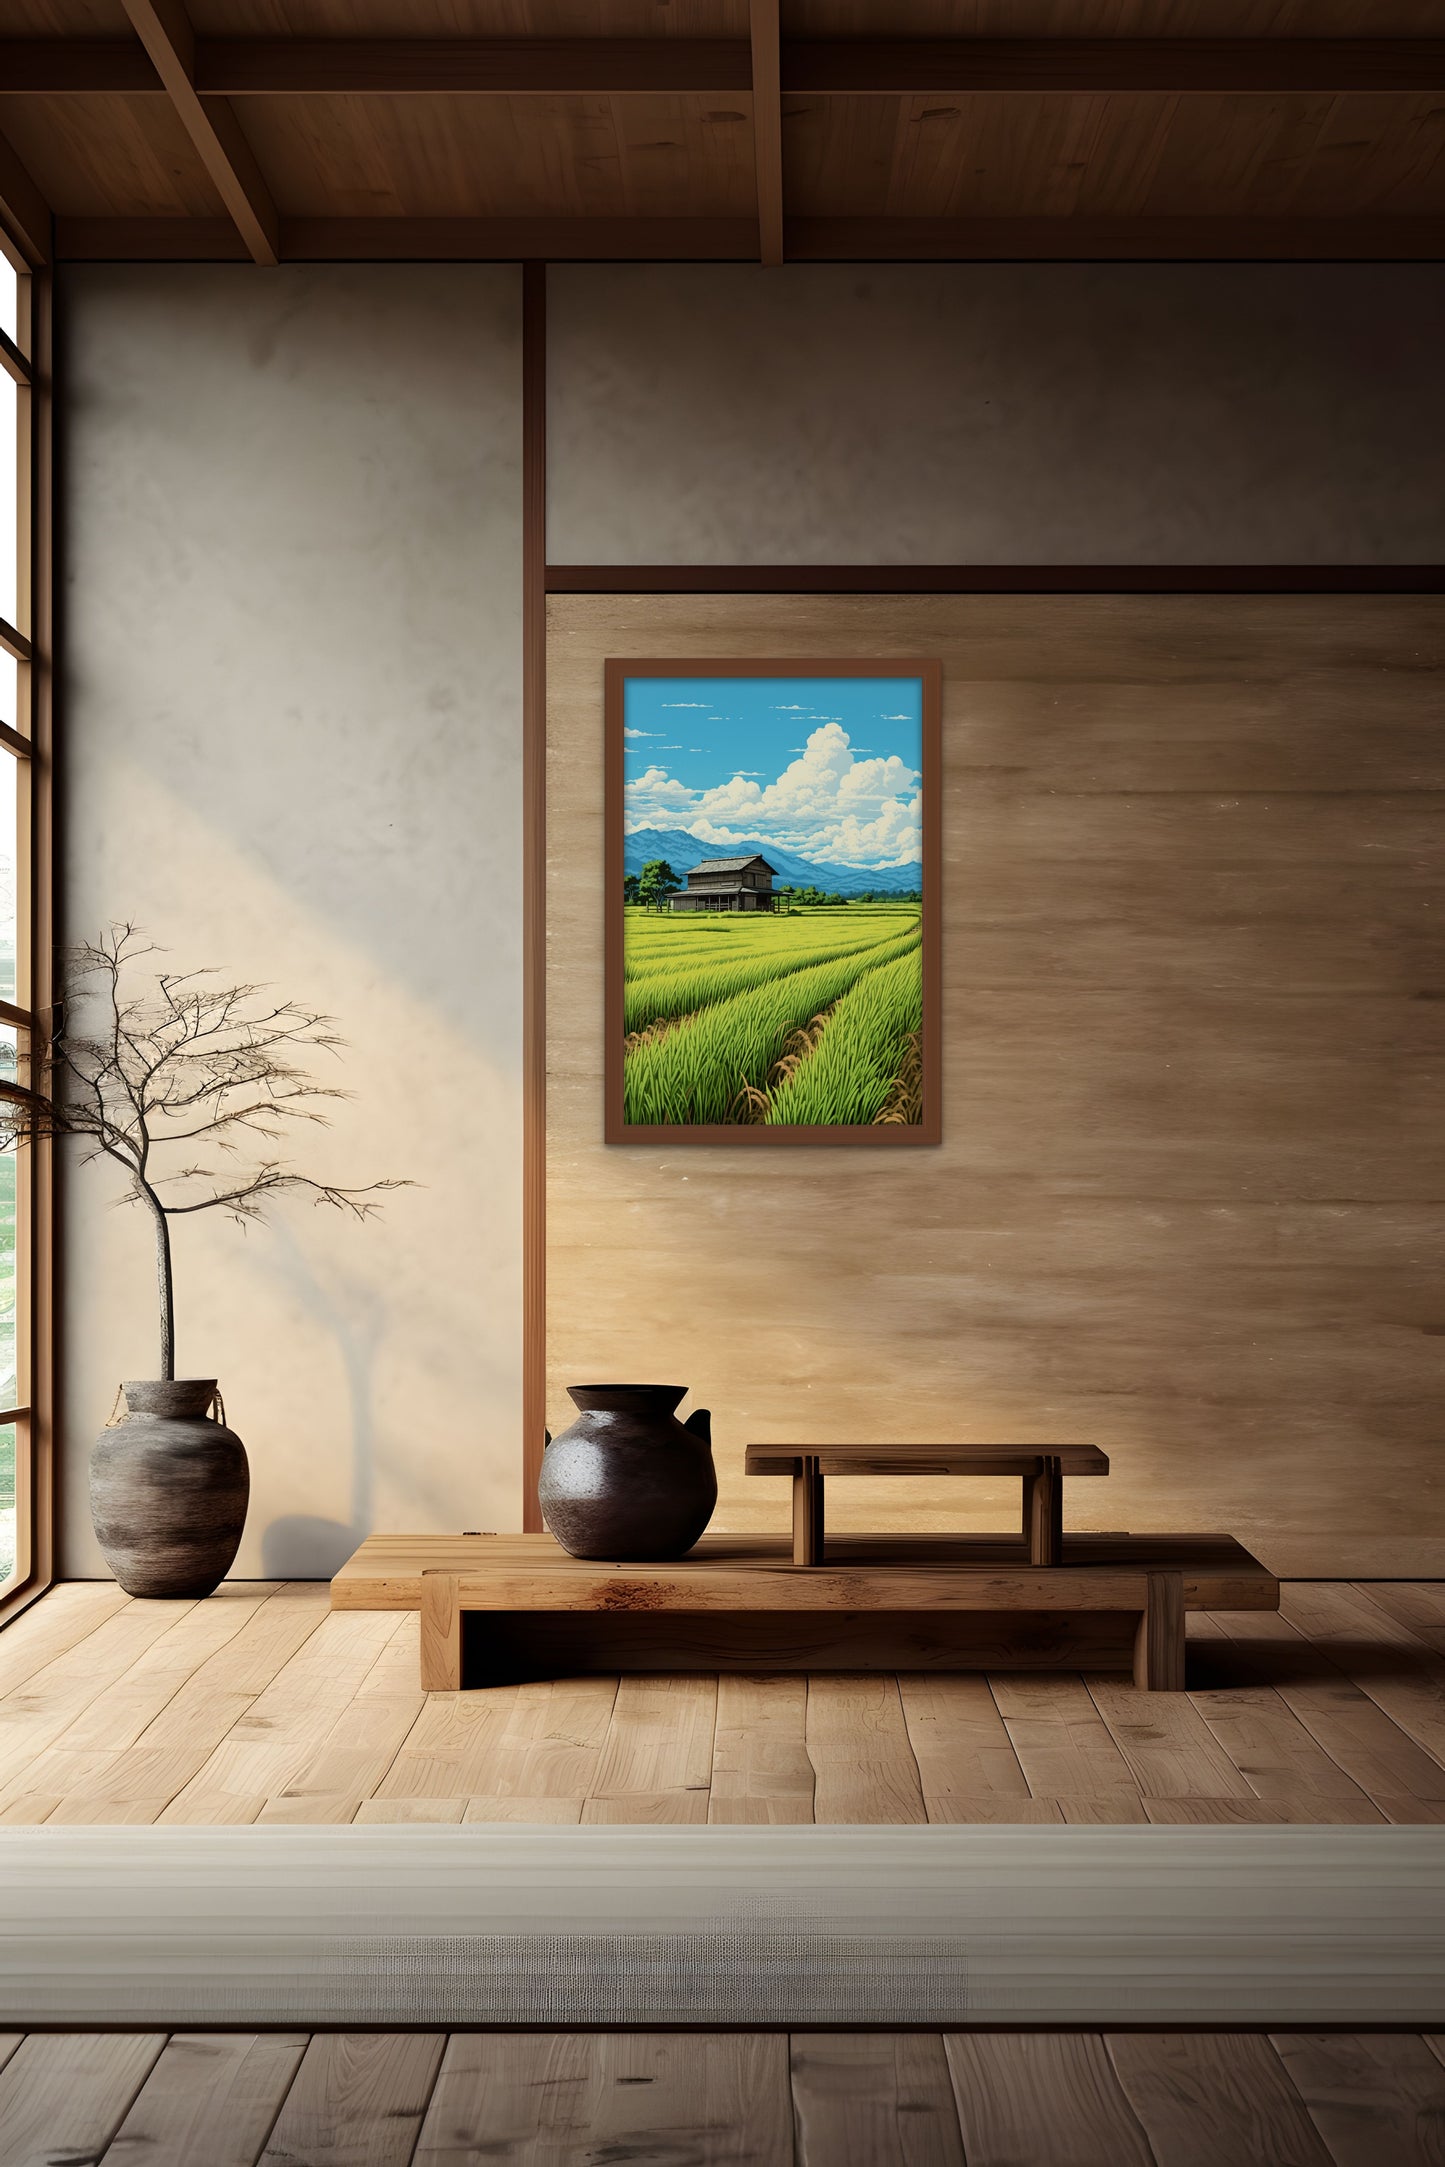 A tranquil Japanese style room with a painting, wooden bench, and vases.